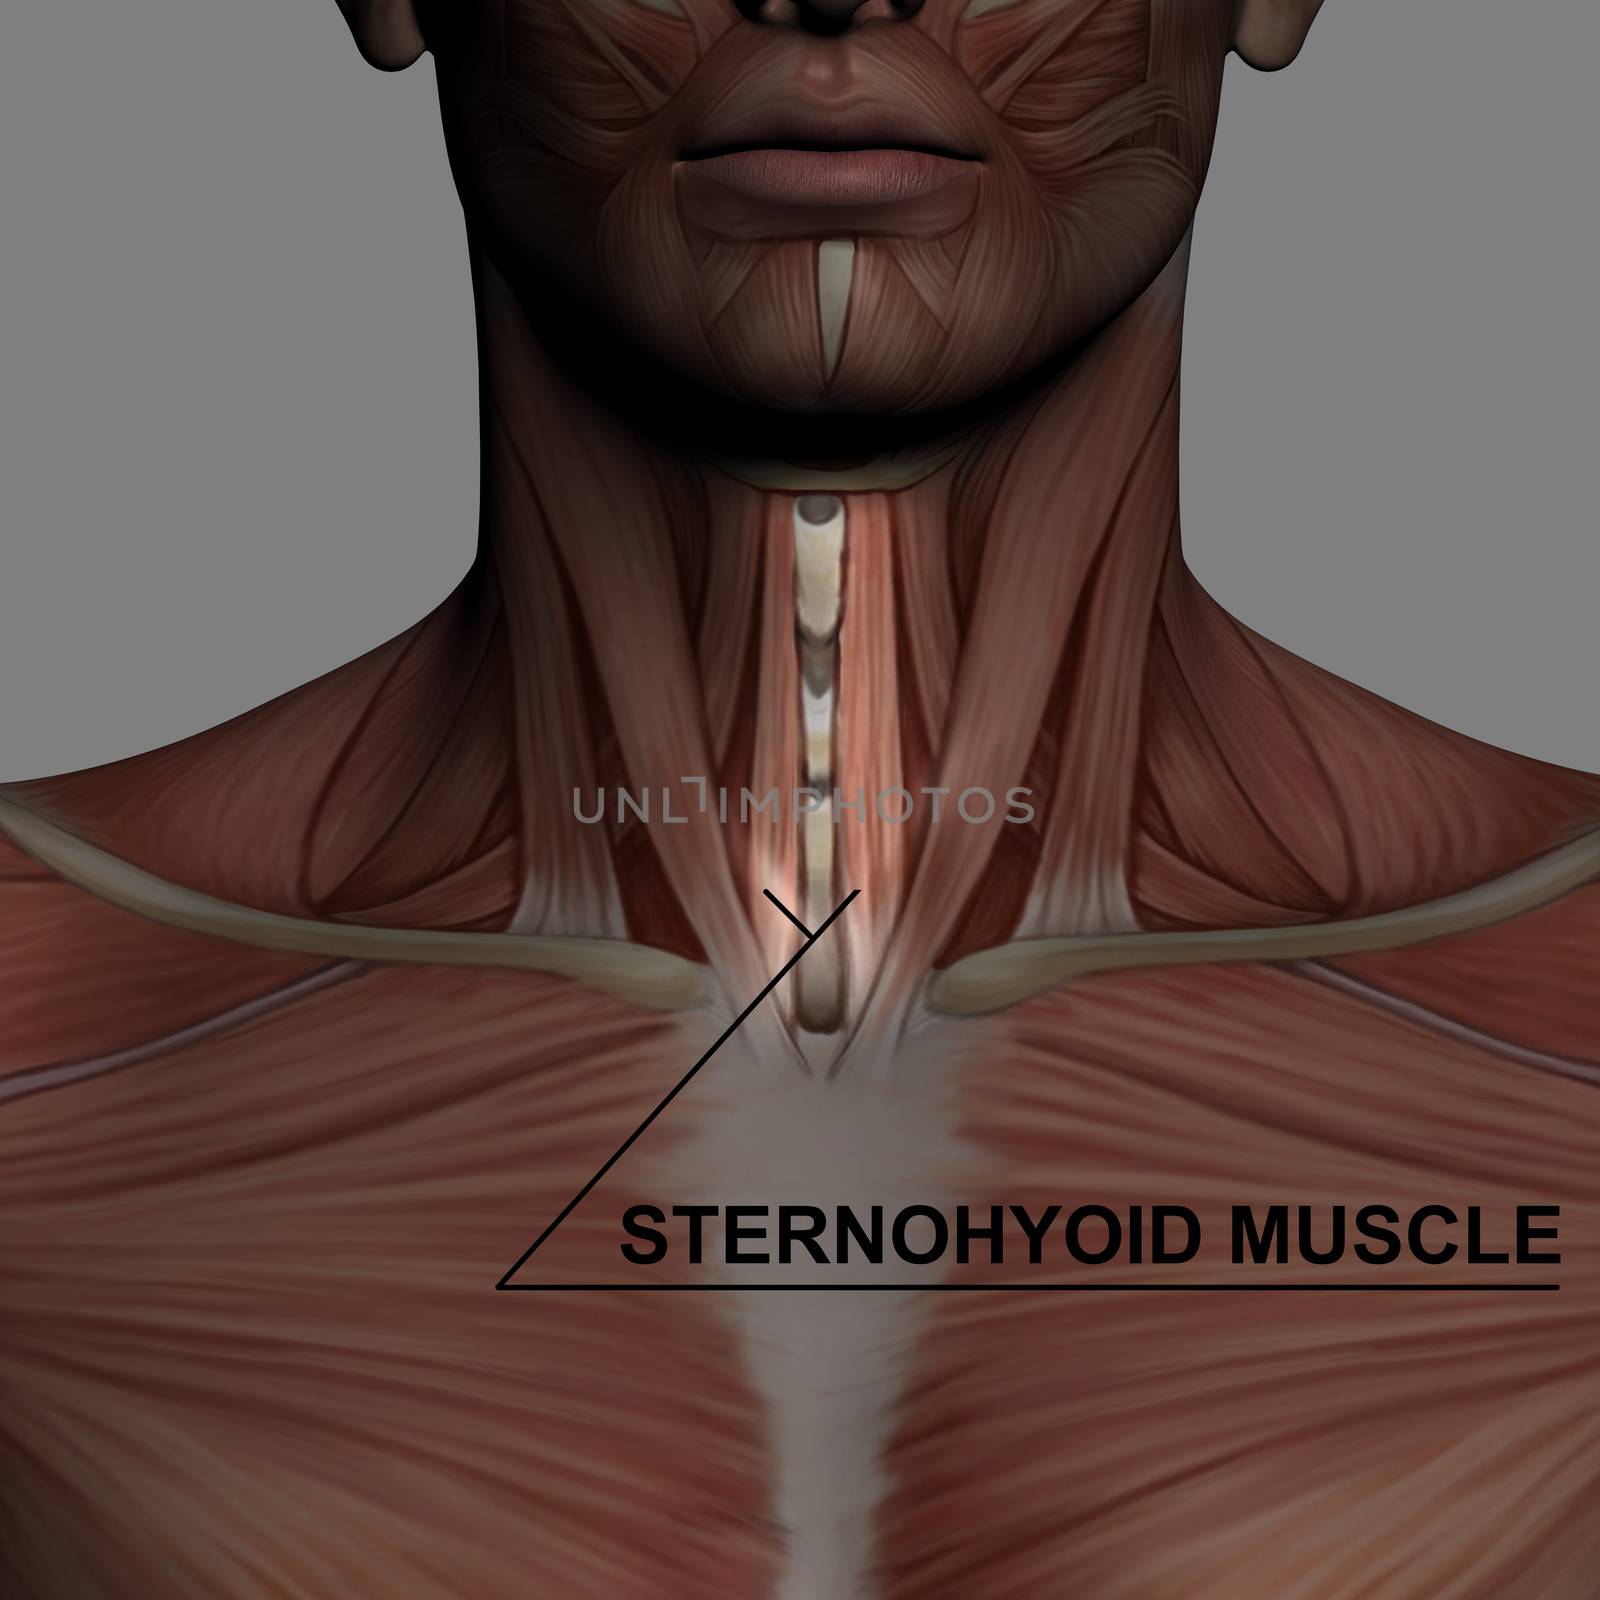 Human Anatomy - Male Muscles made in 3d software with highlighting sternohyoid muscle